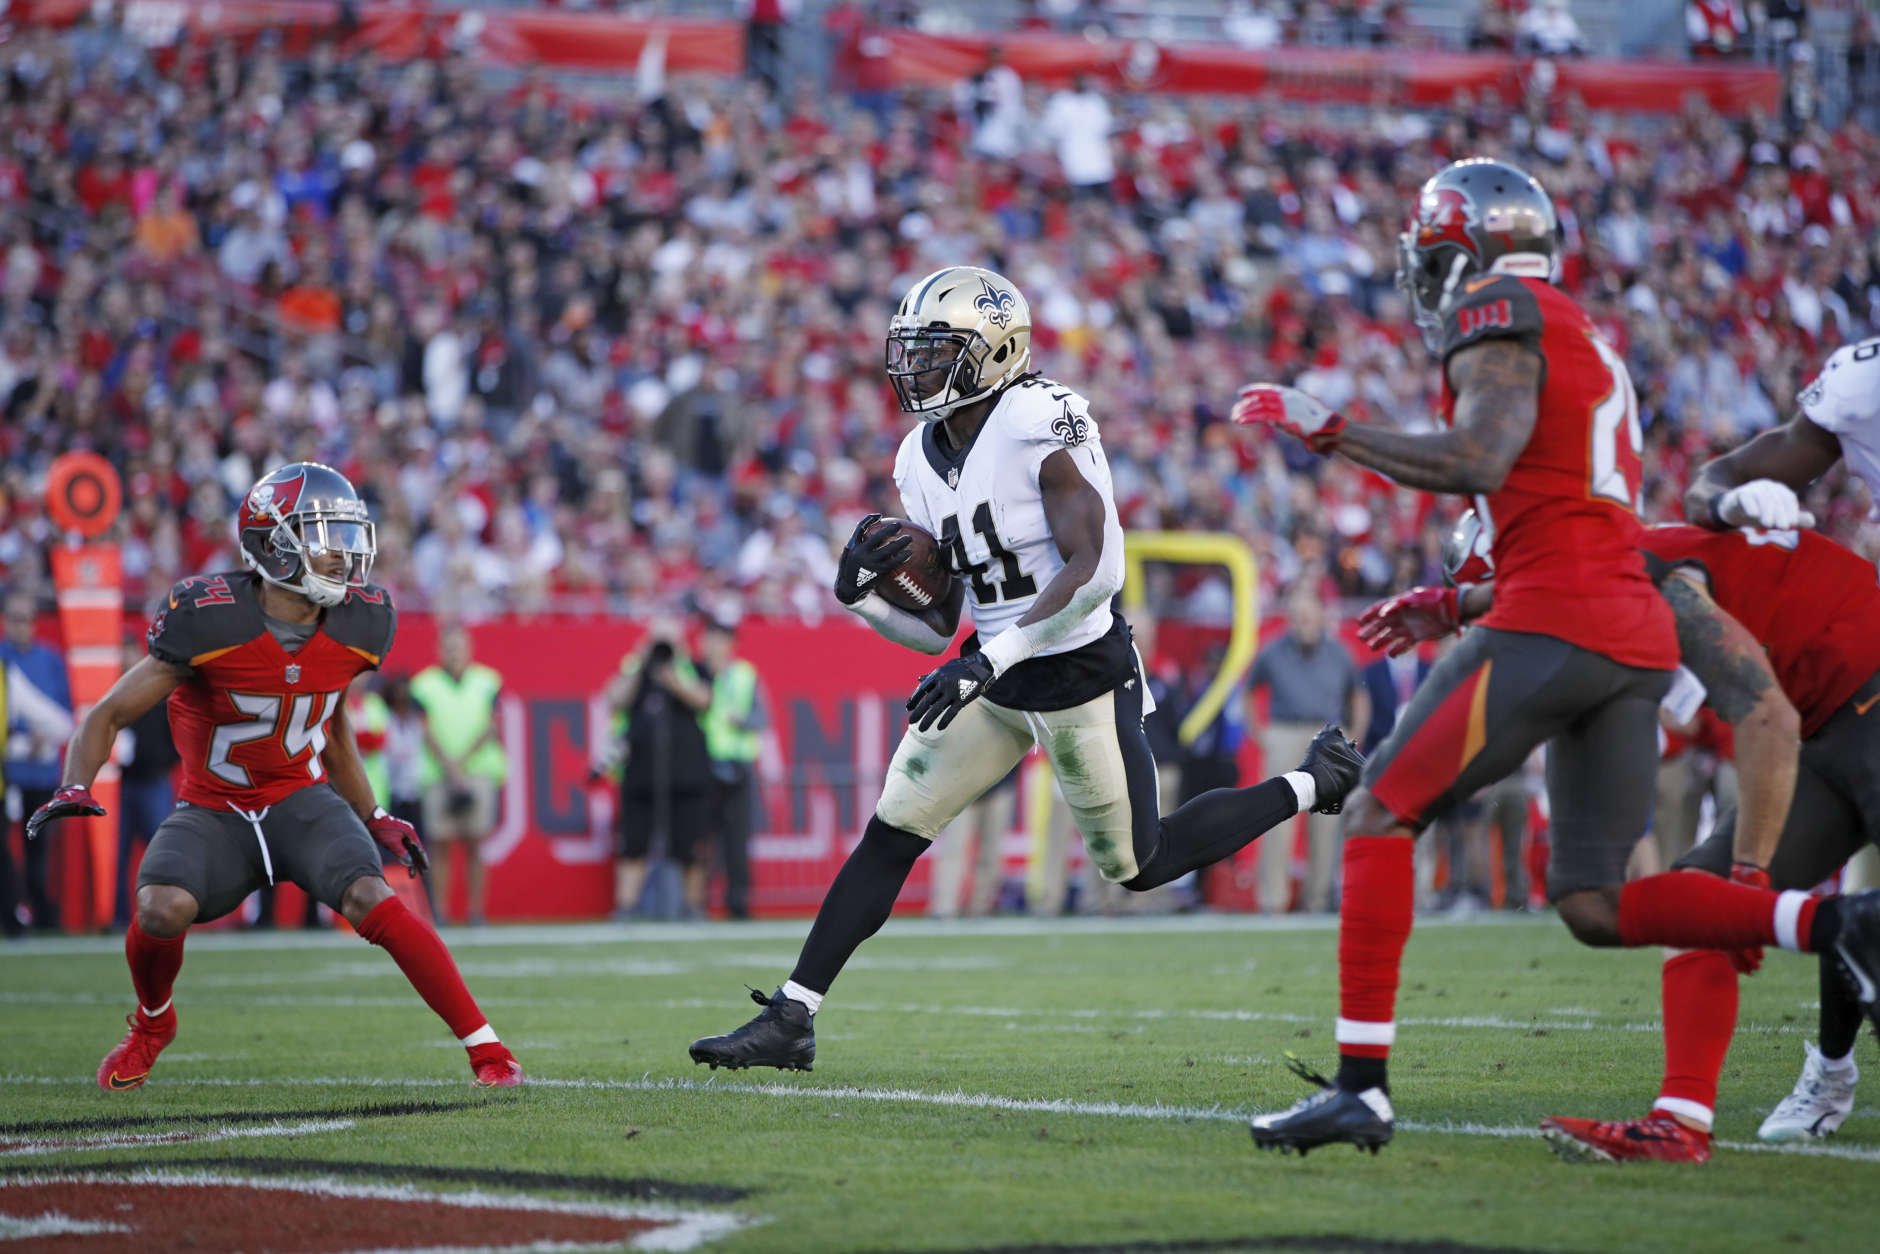 TAMPA, FL - DECEMBER 31: Alvin Kamara #41 of the New Orleans Saints runs into the end zone for a seven-yard touchdown in the first quarter of a game against the Tampa Bay Buccaneers at Raymond James Stadium on December 31, 2017 in Tampa, Florida. (Photo by Joe Robbins/Getty Images)